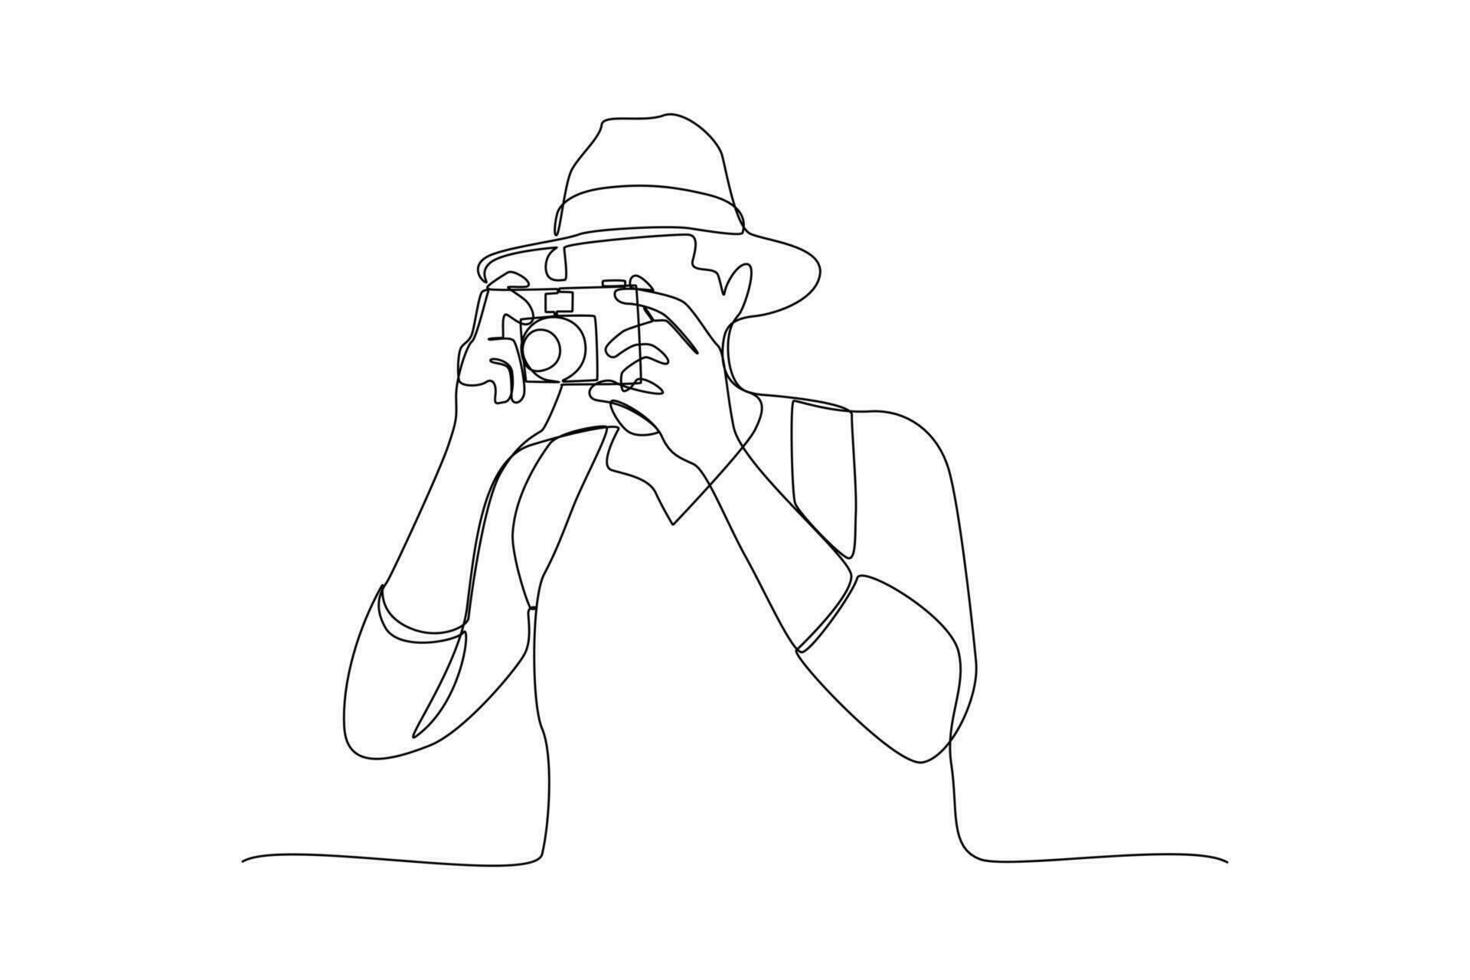 Single one line drawing  Photographer with camera. World photography day concept. Continuous line draw design graphic vector illustration.